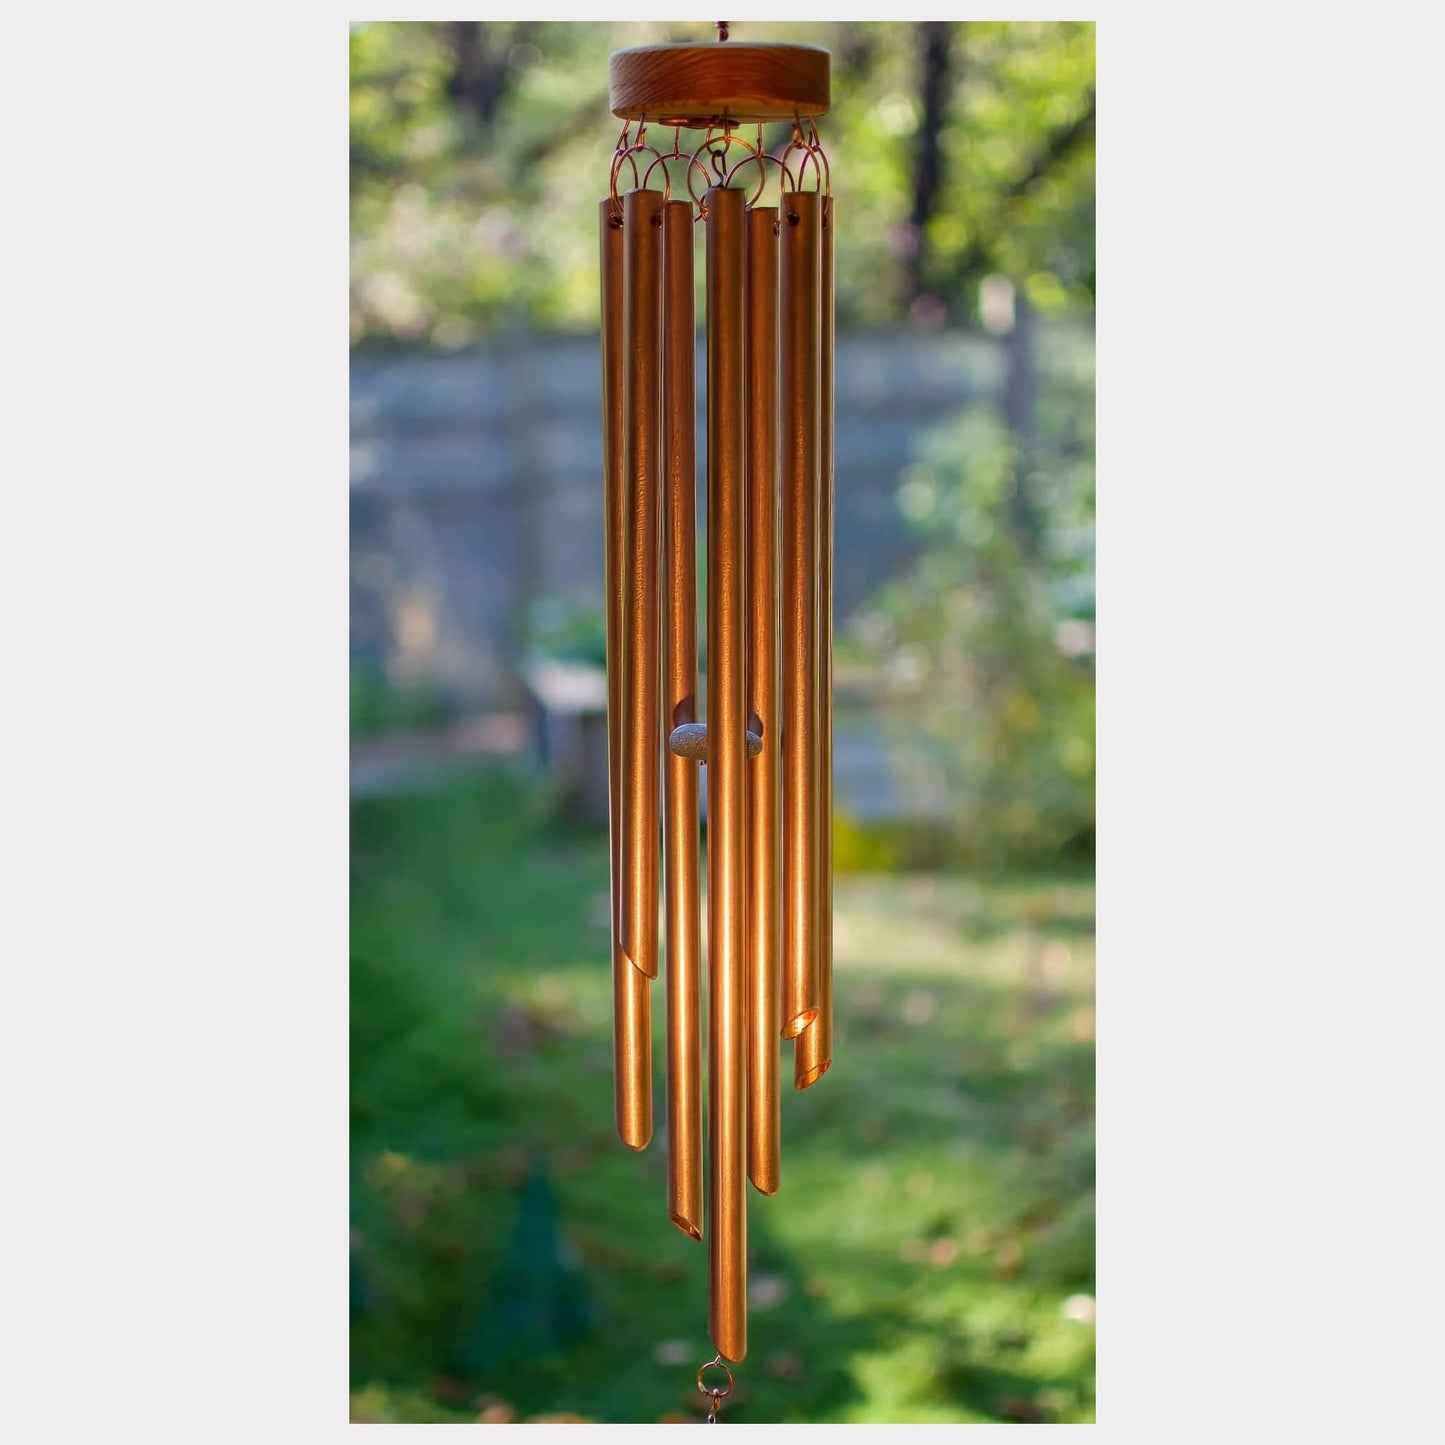 Sea Glass Wind Chime Handcrafted 7 Copper Chimes